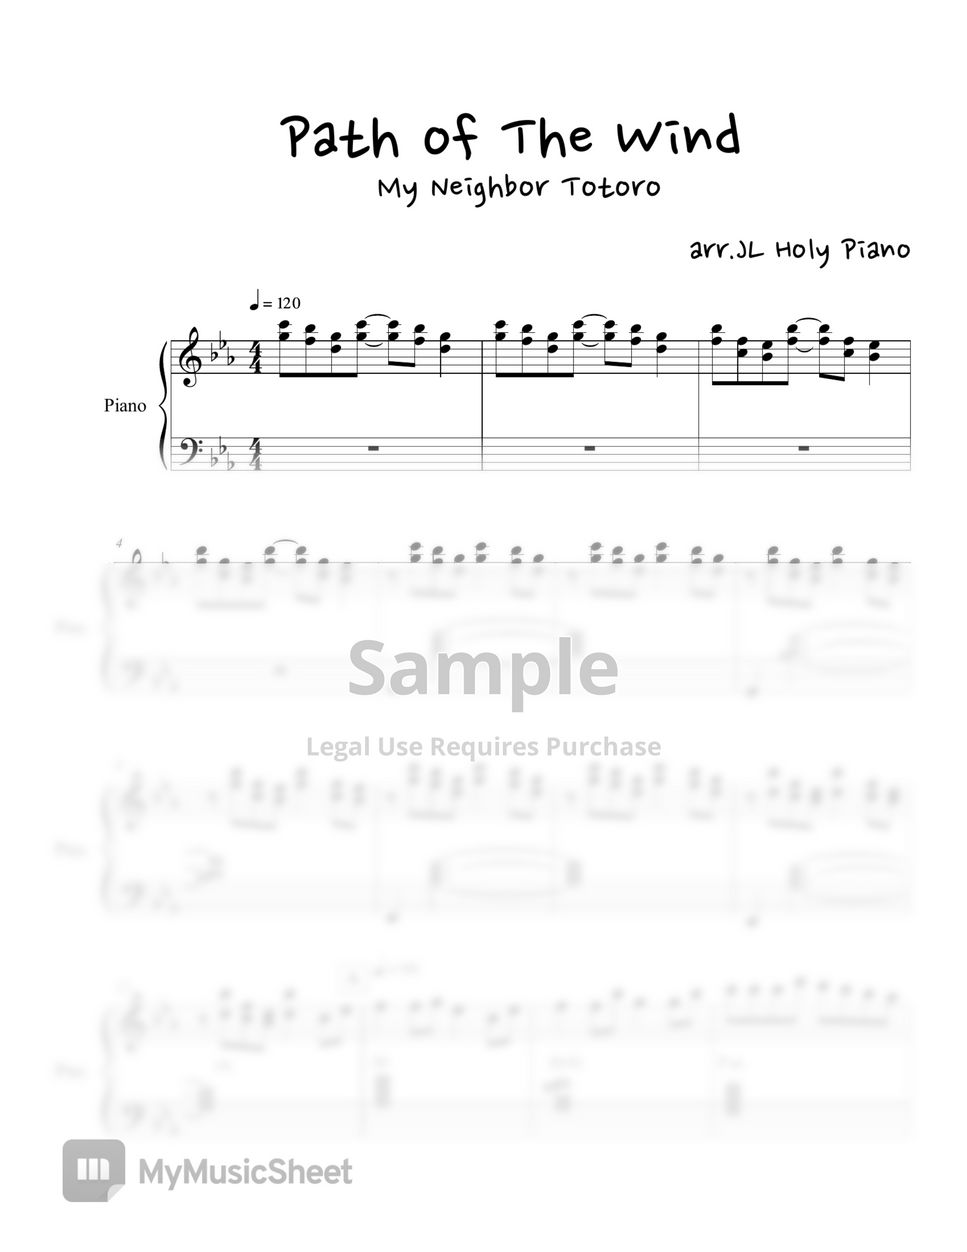 My Neighbor Totoro - Path of The Wind by JL Holy Piano